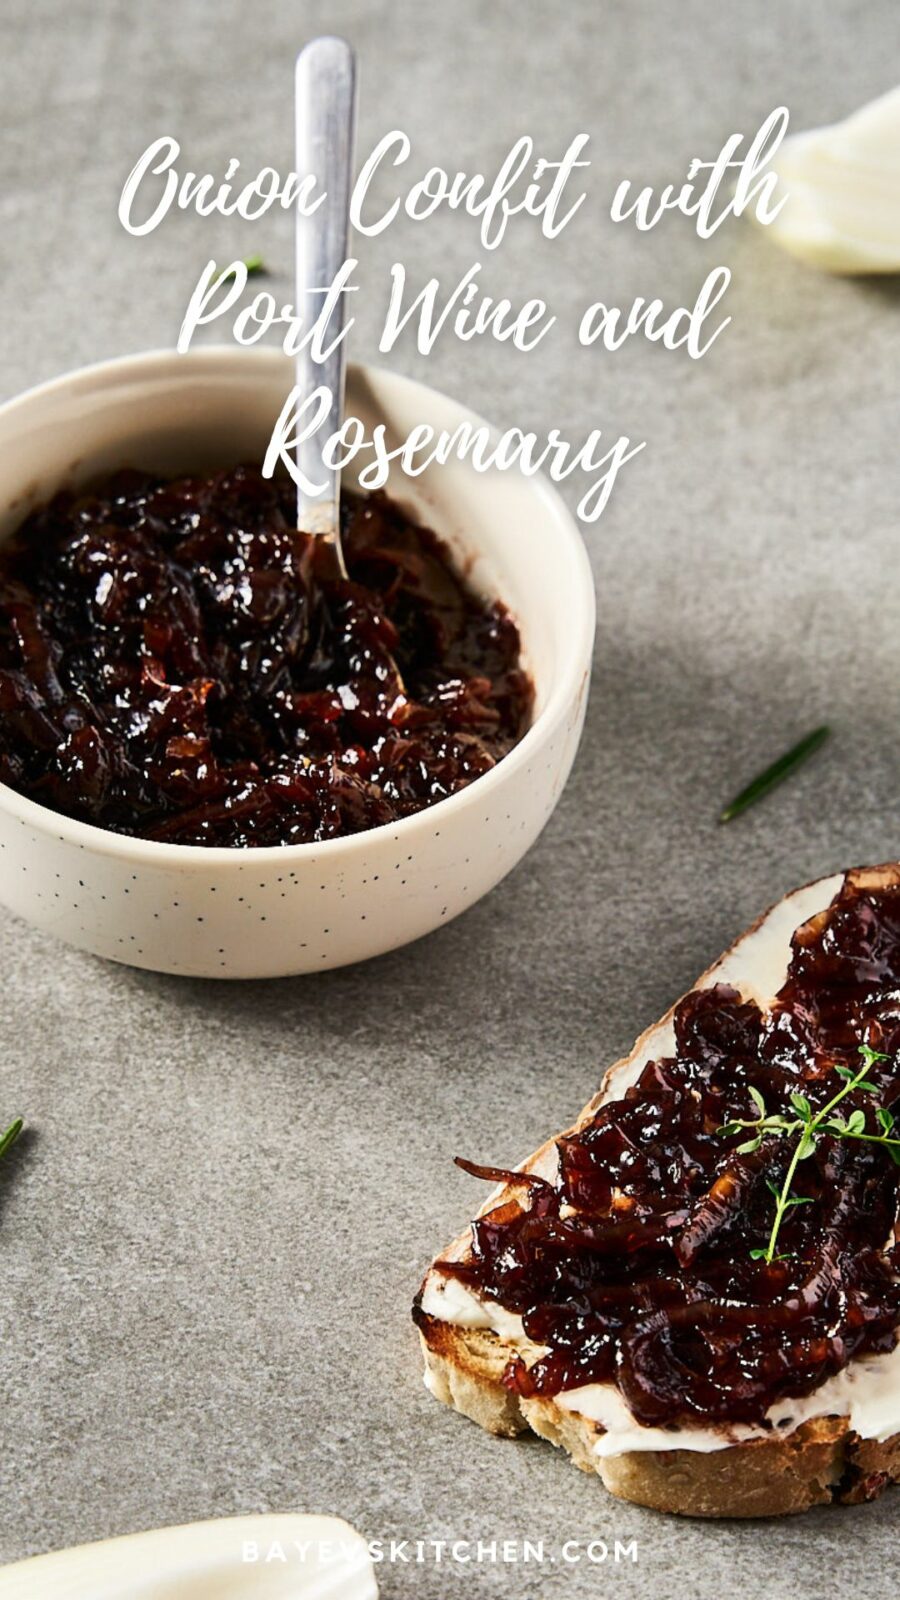 Onion Confit with Port Wine and Rosemary by bayevskitchen.com